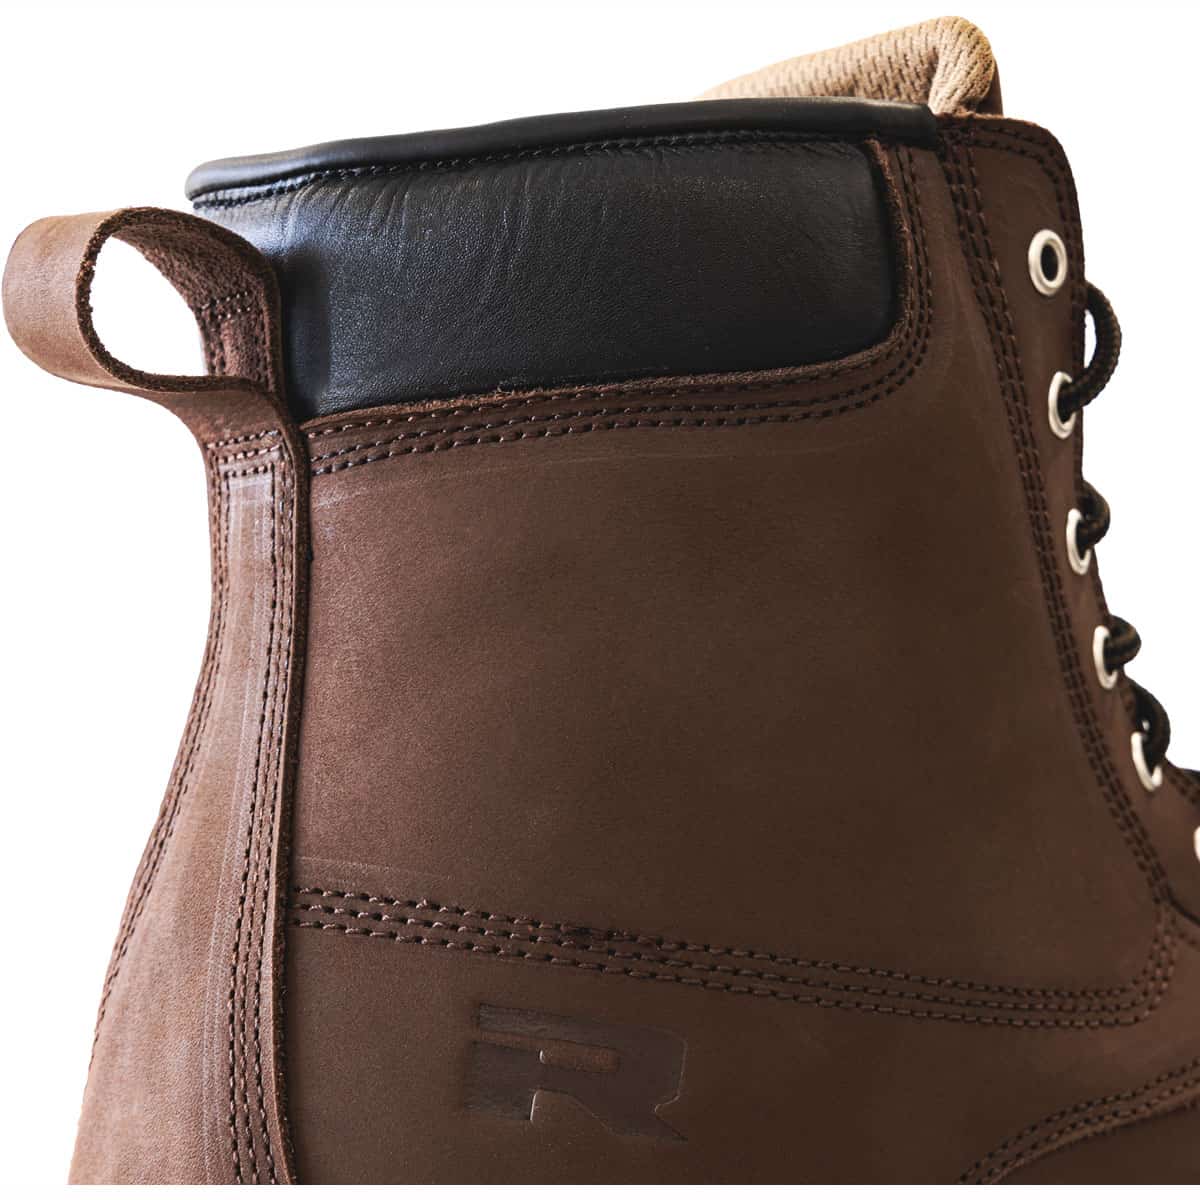 Richa Calgary Casual motorcycle boots: 100% leather construction with timeless design - padded heel